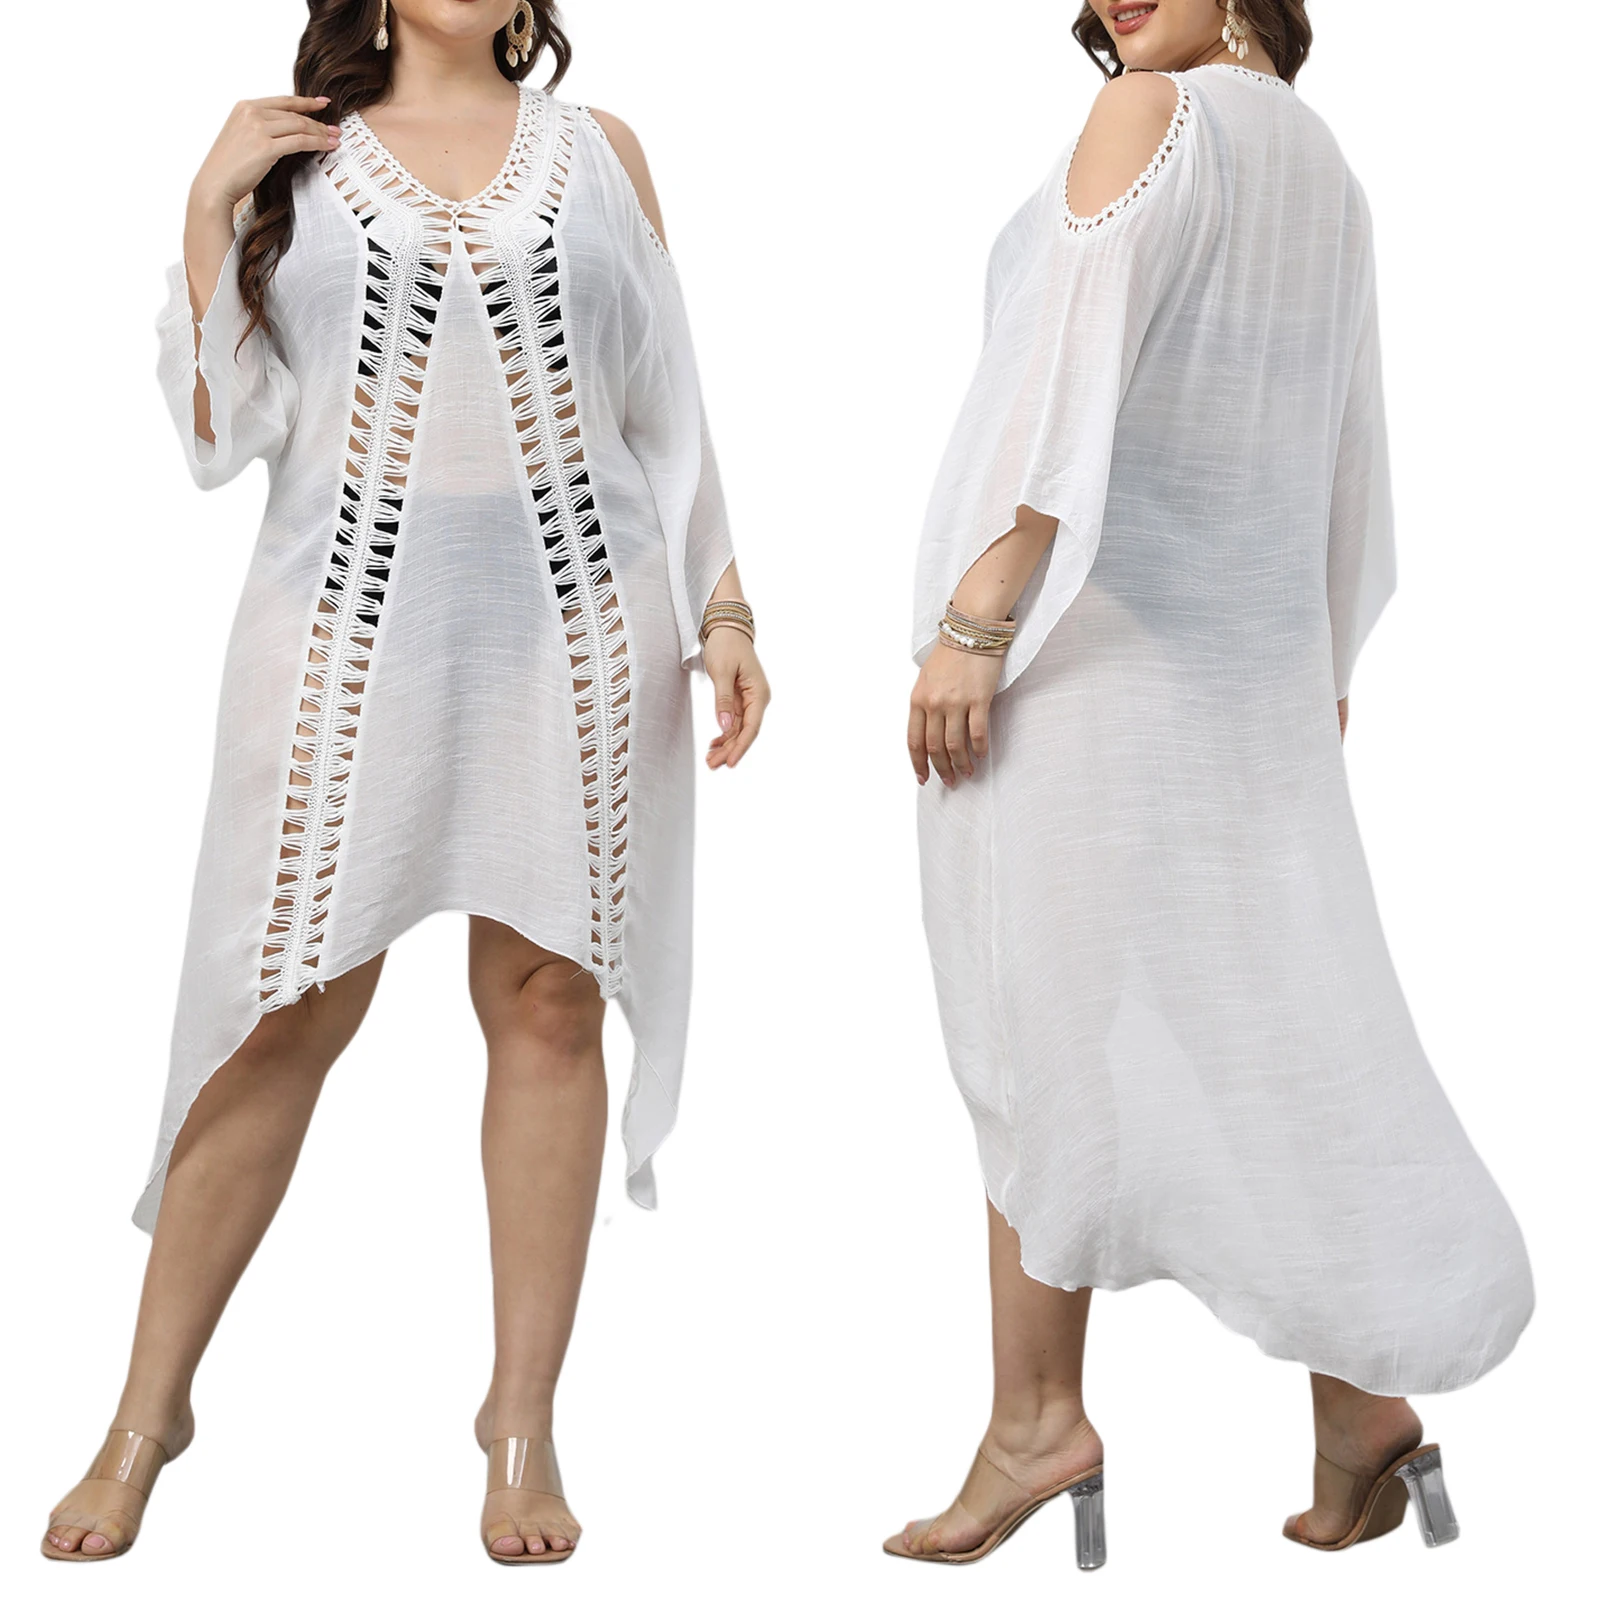 New Women Swimming Dress Plus Size Beach Cover Up Hollow Trim Loose Fit Solid Color Irregular Hem Mujer Swimwear Beachwear bathing suit coverups